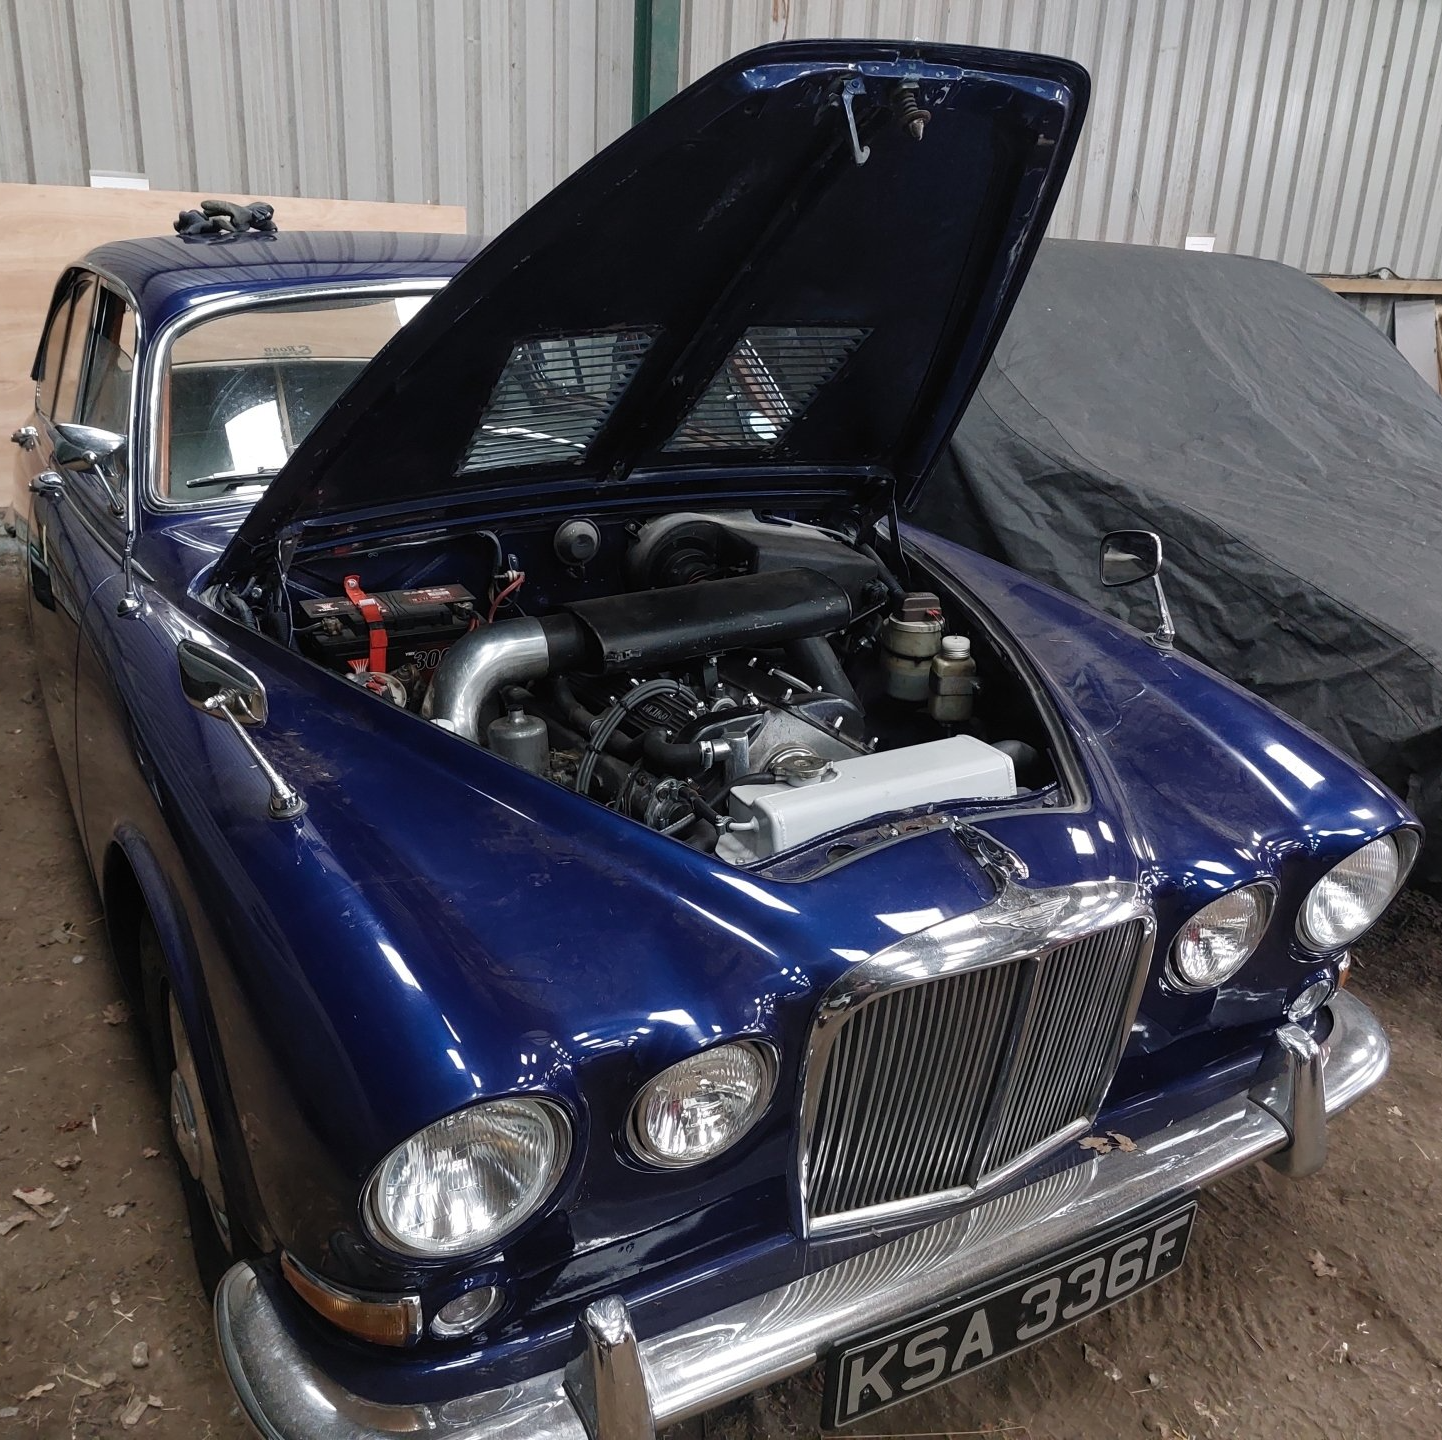 Tuning a Classic Jaguar by AG Classic Car Tuning